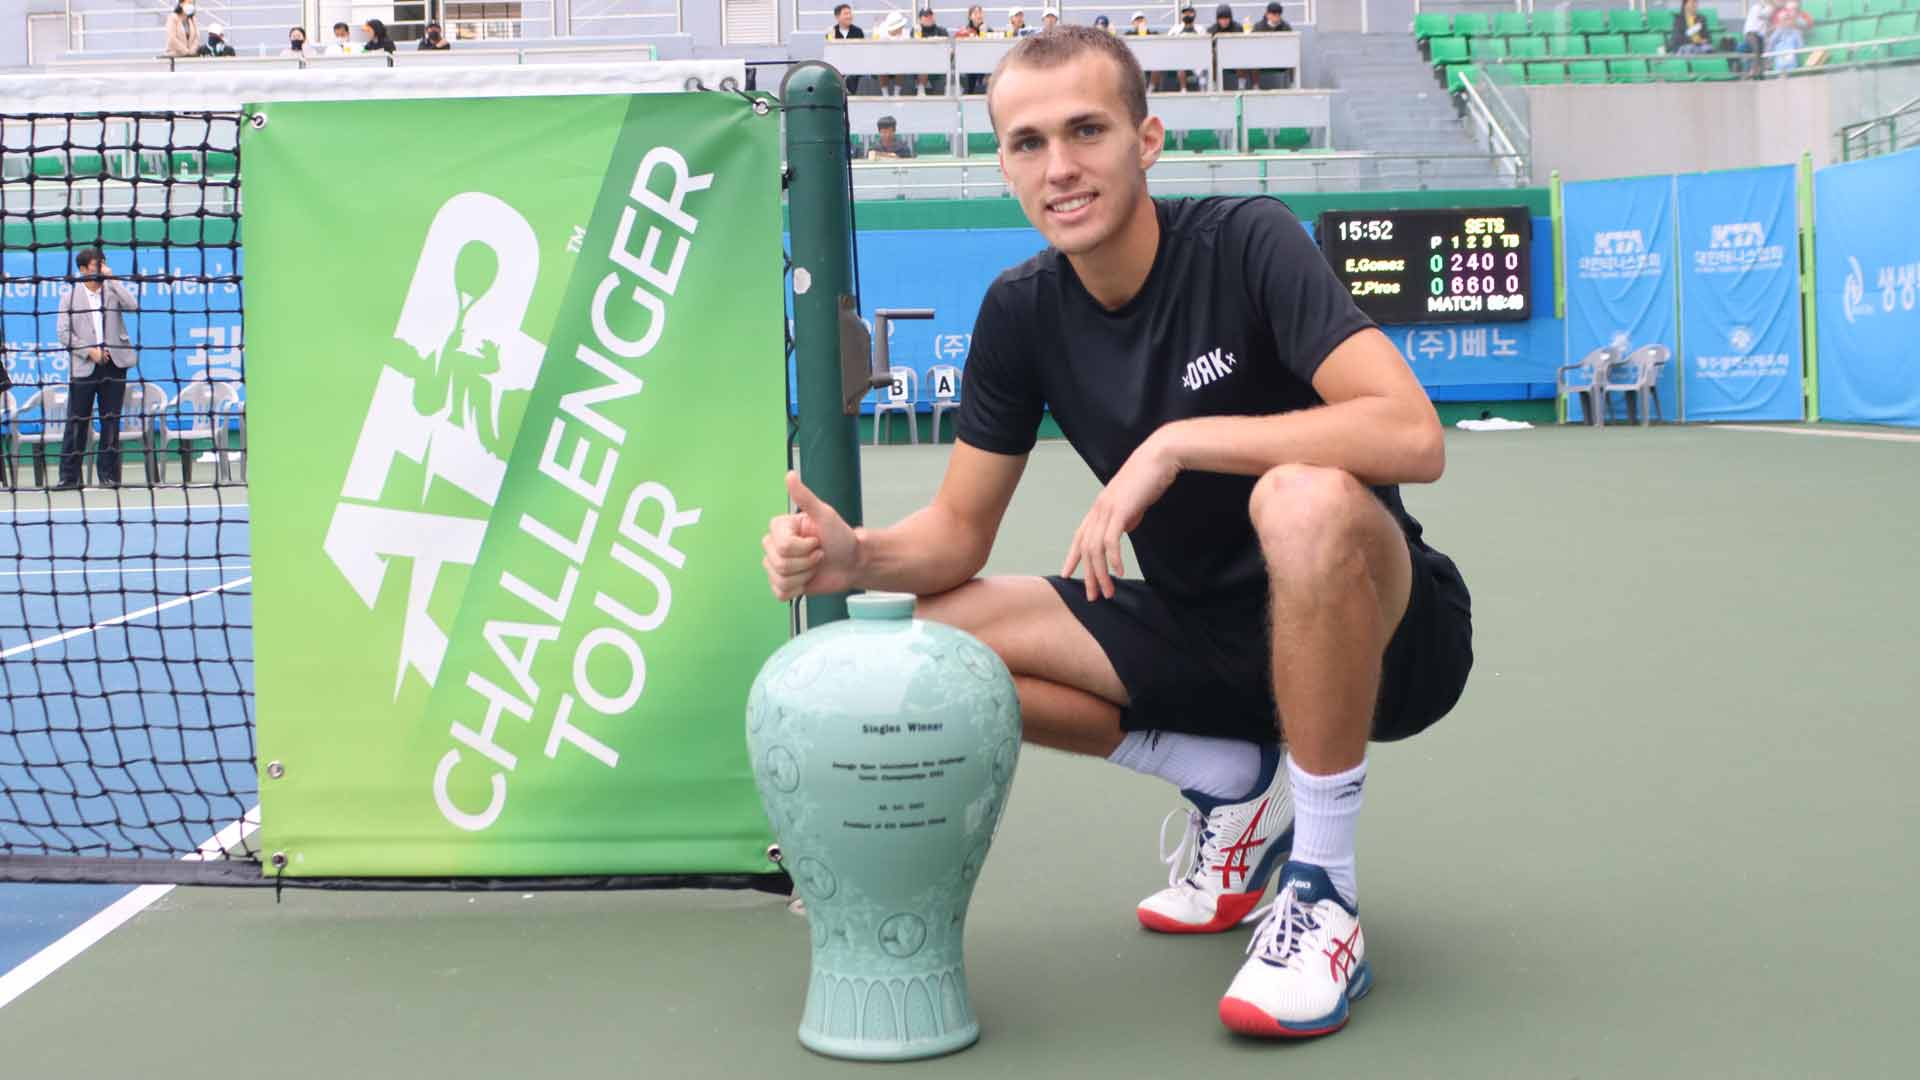 Zsombor Piros is crowned champion at the Gwangju Open Challenger.